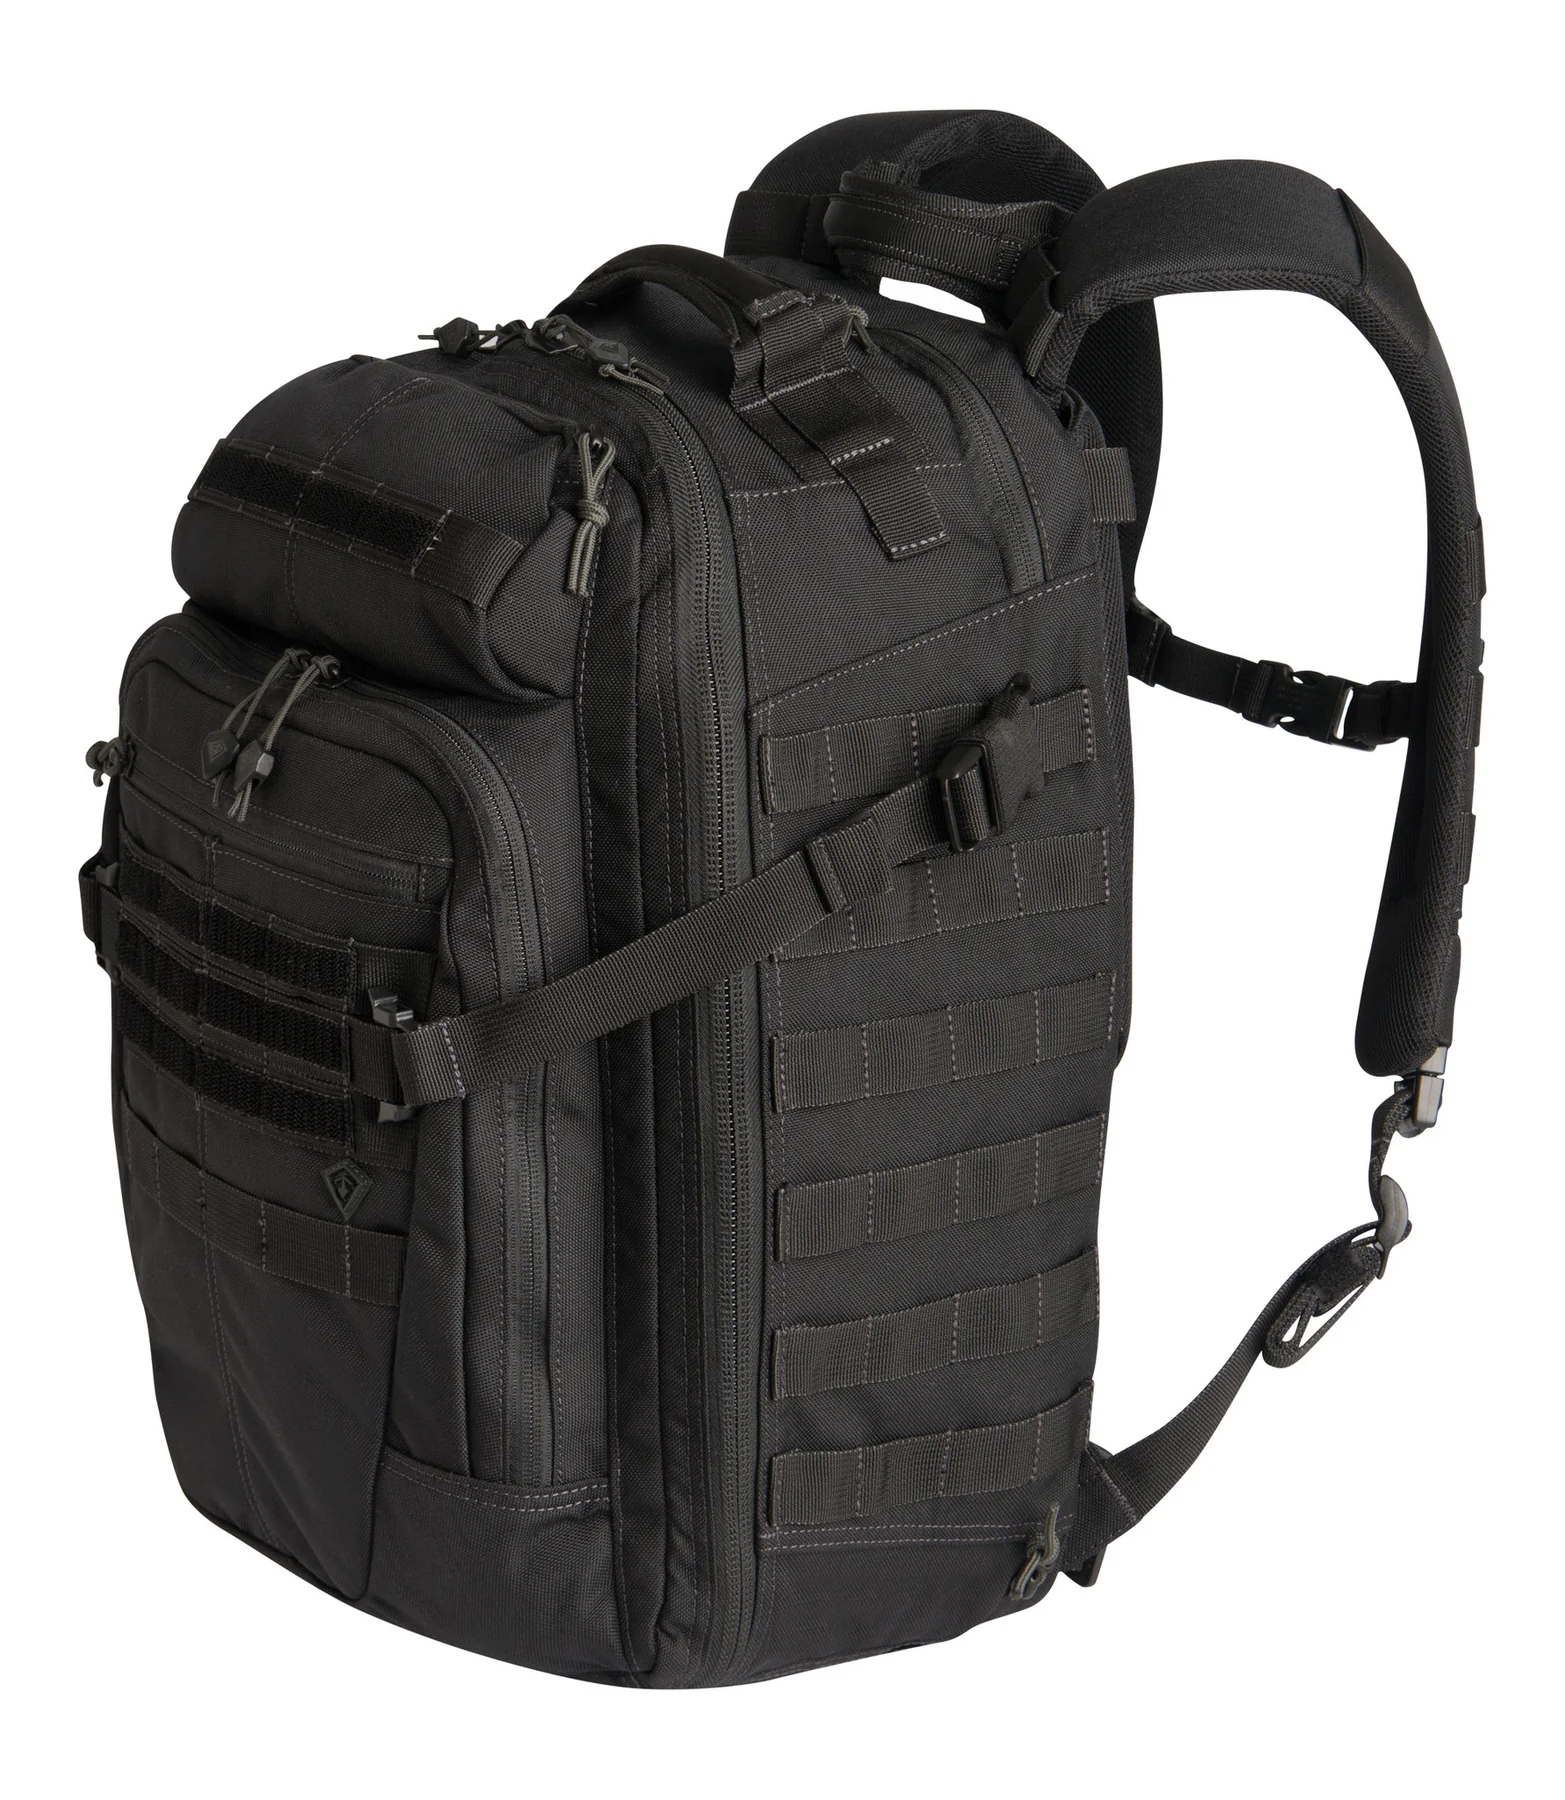 First Tactical Specialist BackPack 1 Day 36L 180005 - Black